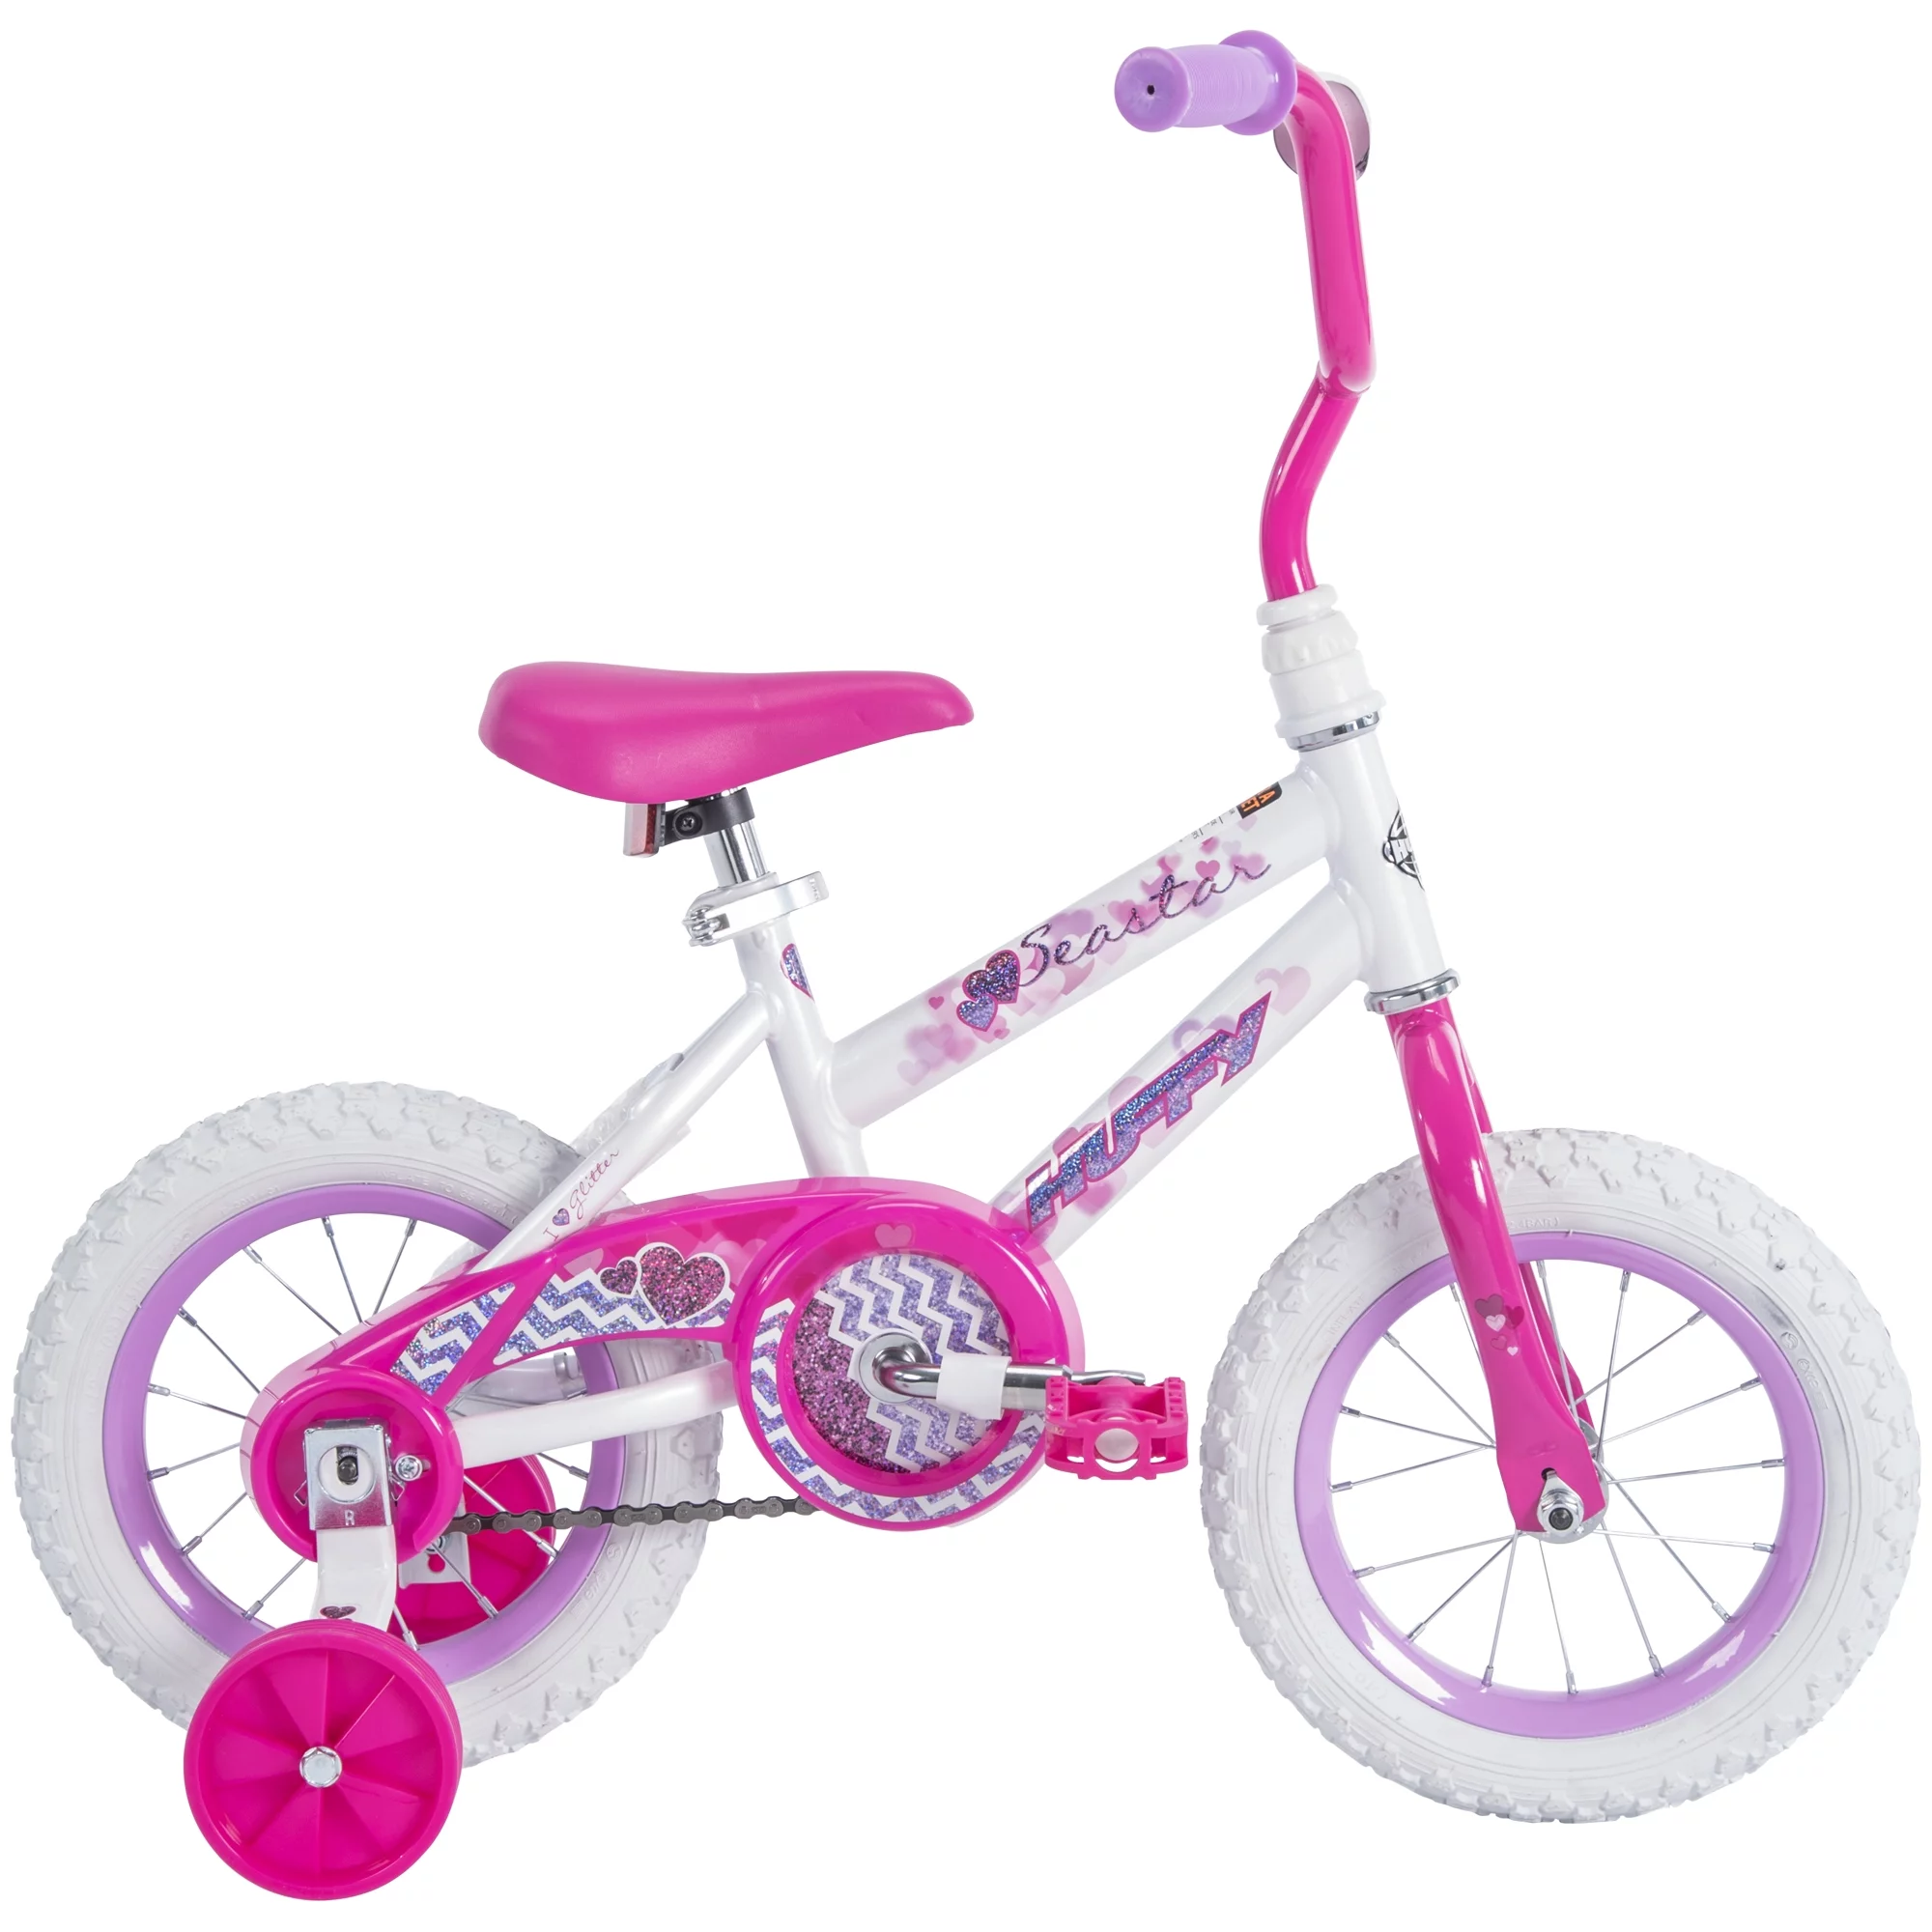 Huffy 12 in. Sea Star Kids Bike for Girl ages 3 - 5 years, White